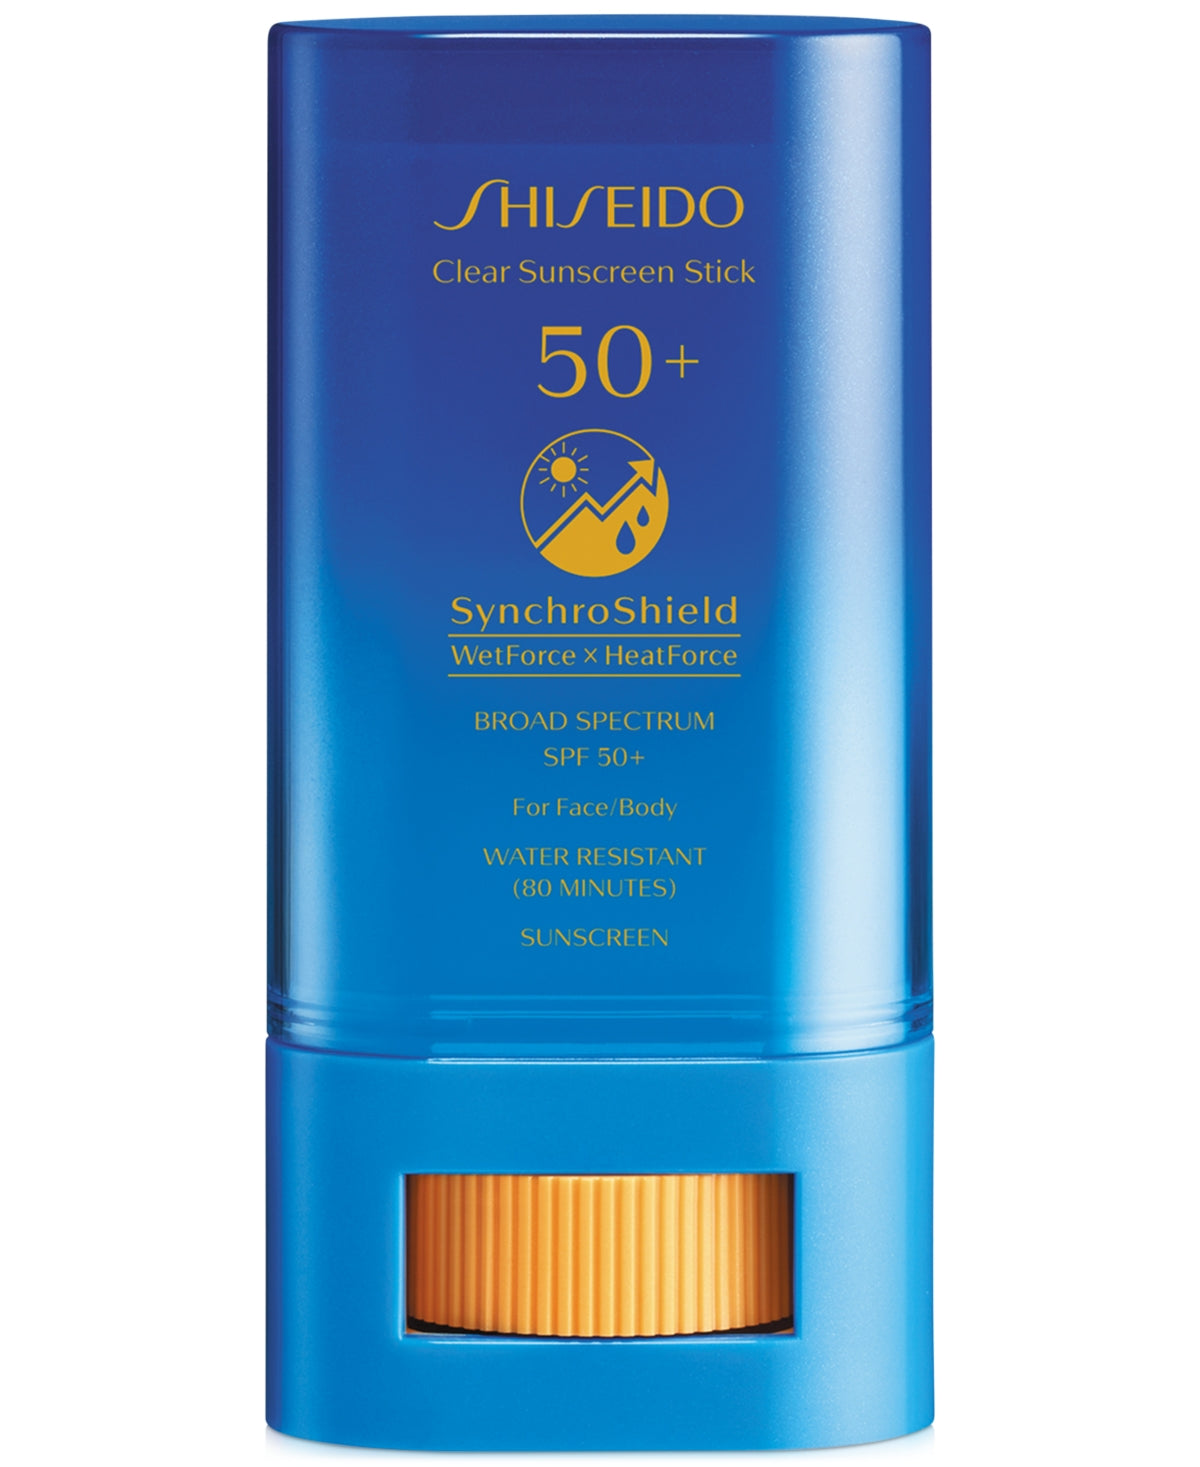 Shiseido SynchroShield WetForce x HeatForce Clear Sunscreen Stick SPF 50+ for Face & Body at Nordstrom